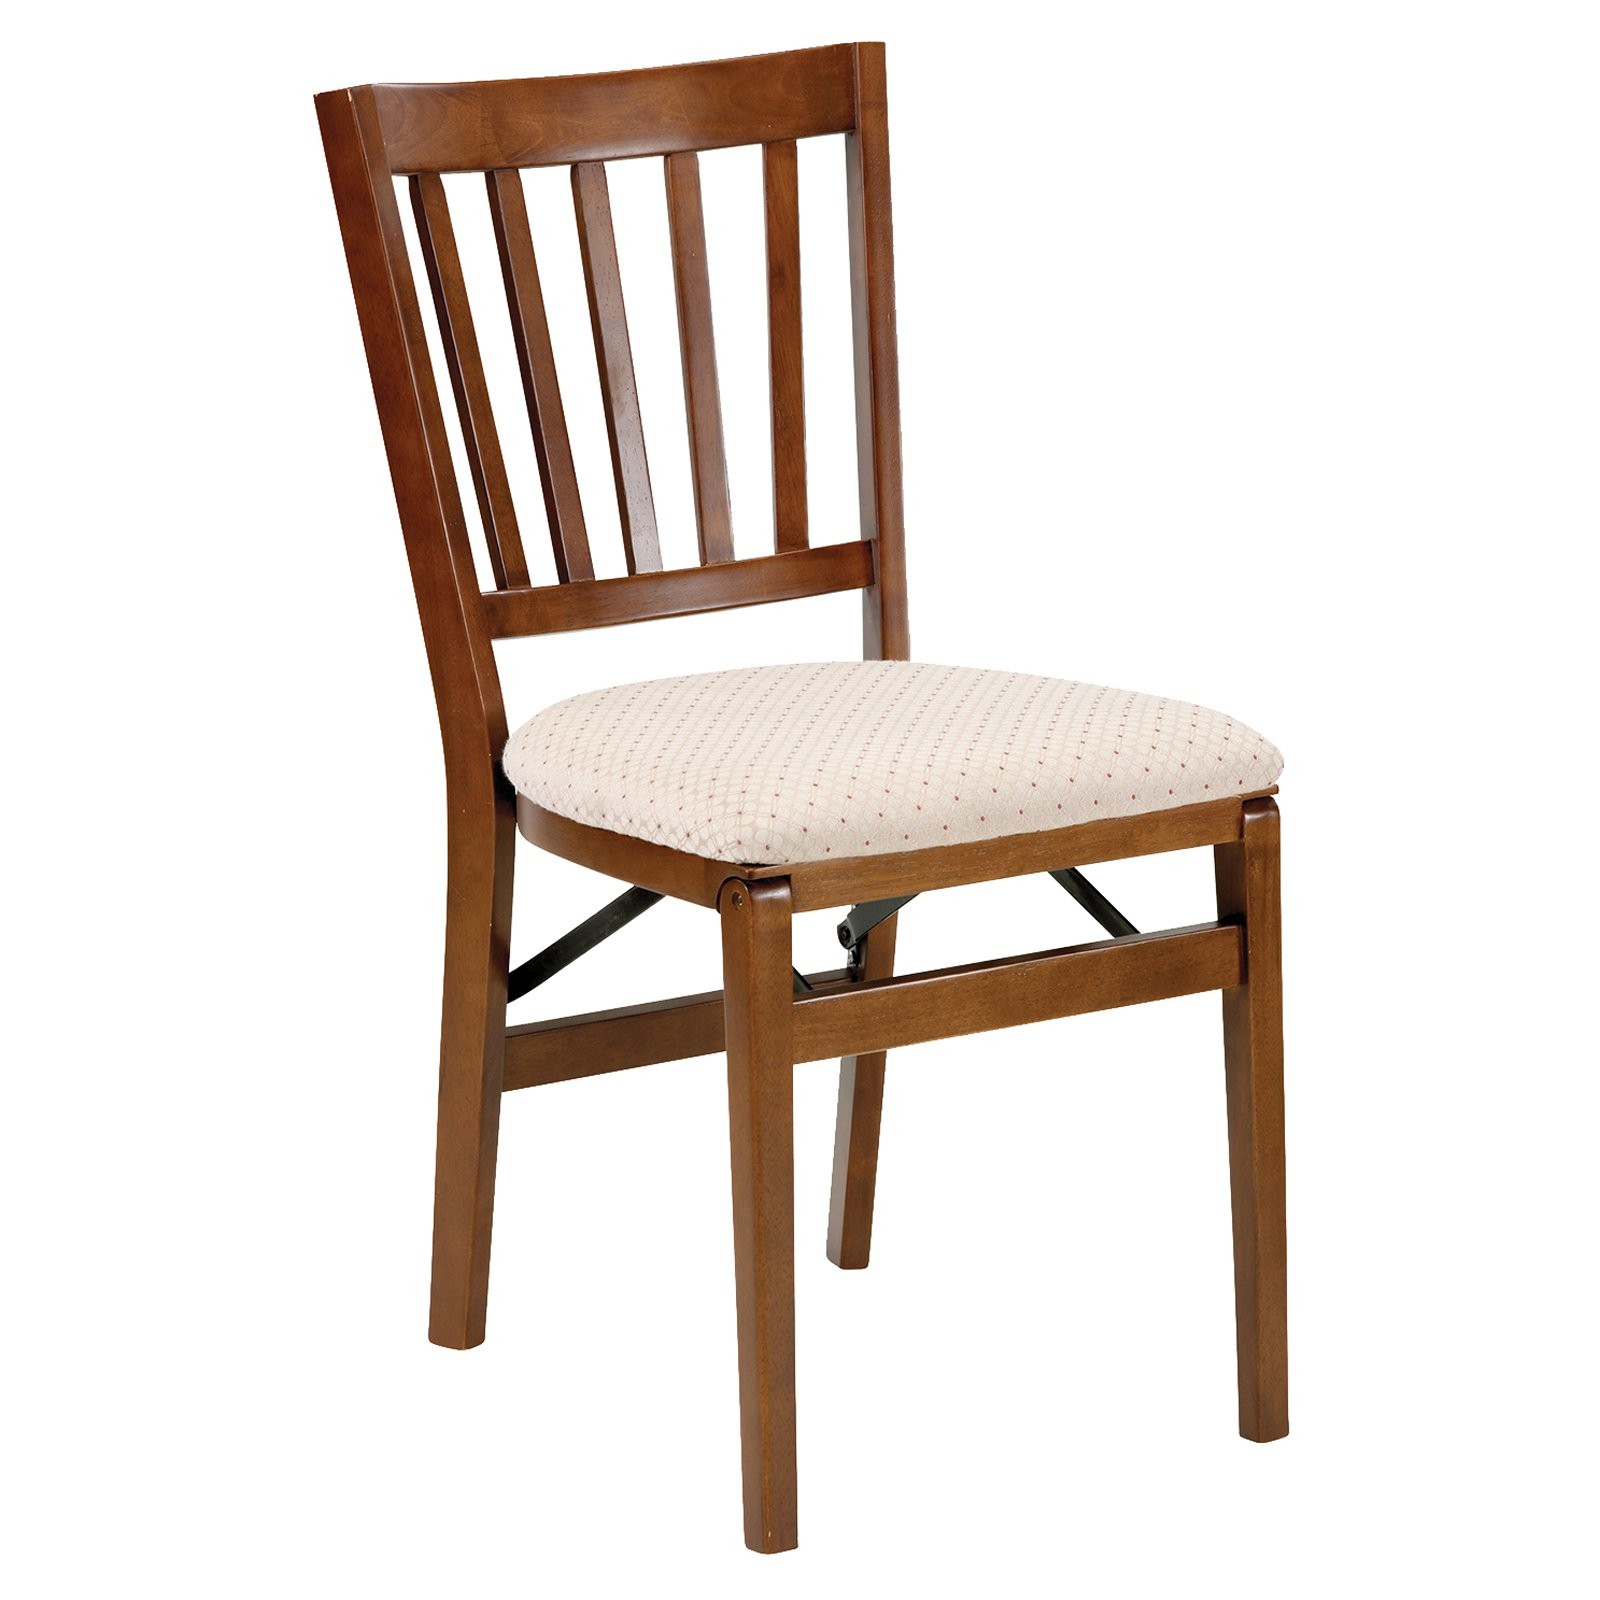 Schoolhouse Wood Folding Chair with Upholstered Seat (Set of 2) Finish: Fruitwood